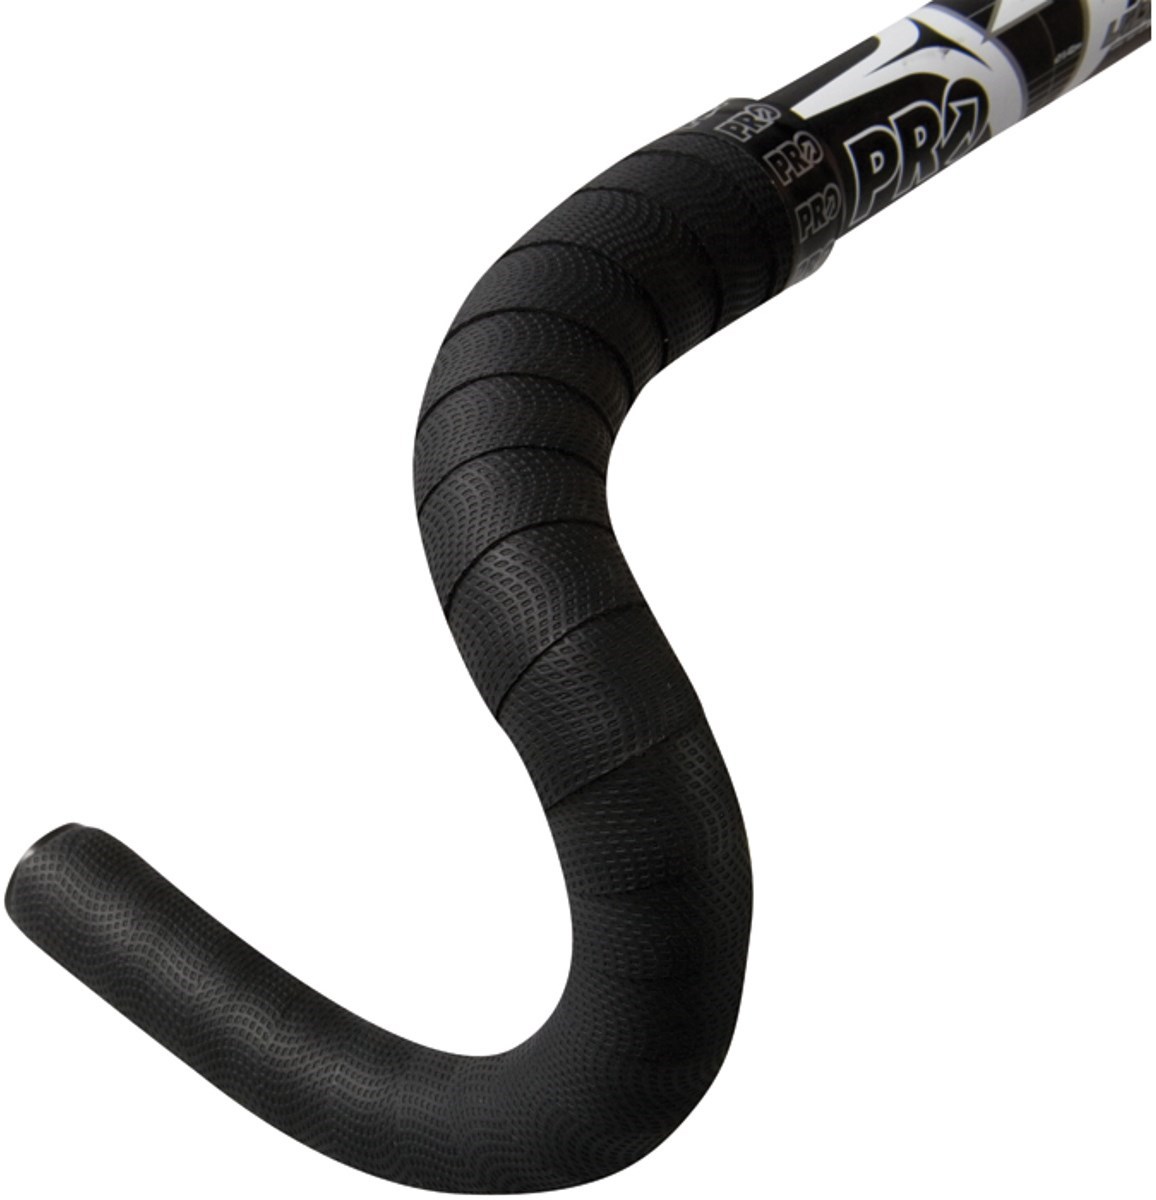 Pro Digital Carbon Bar Tape And Plugs product image